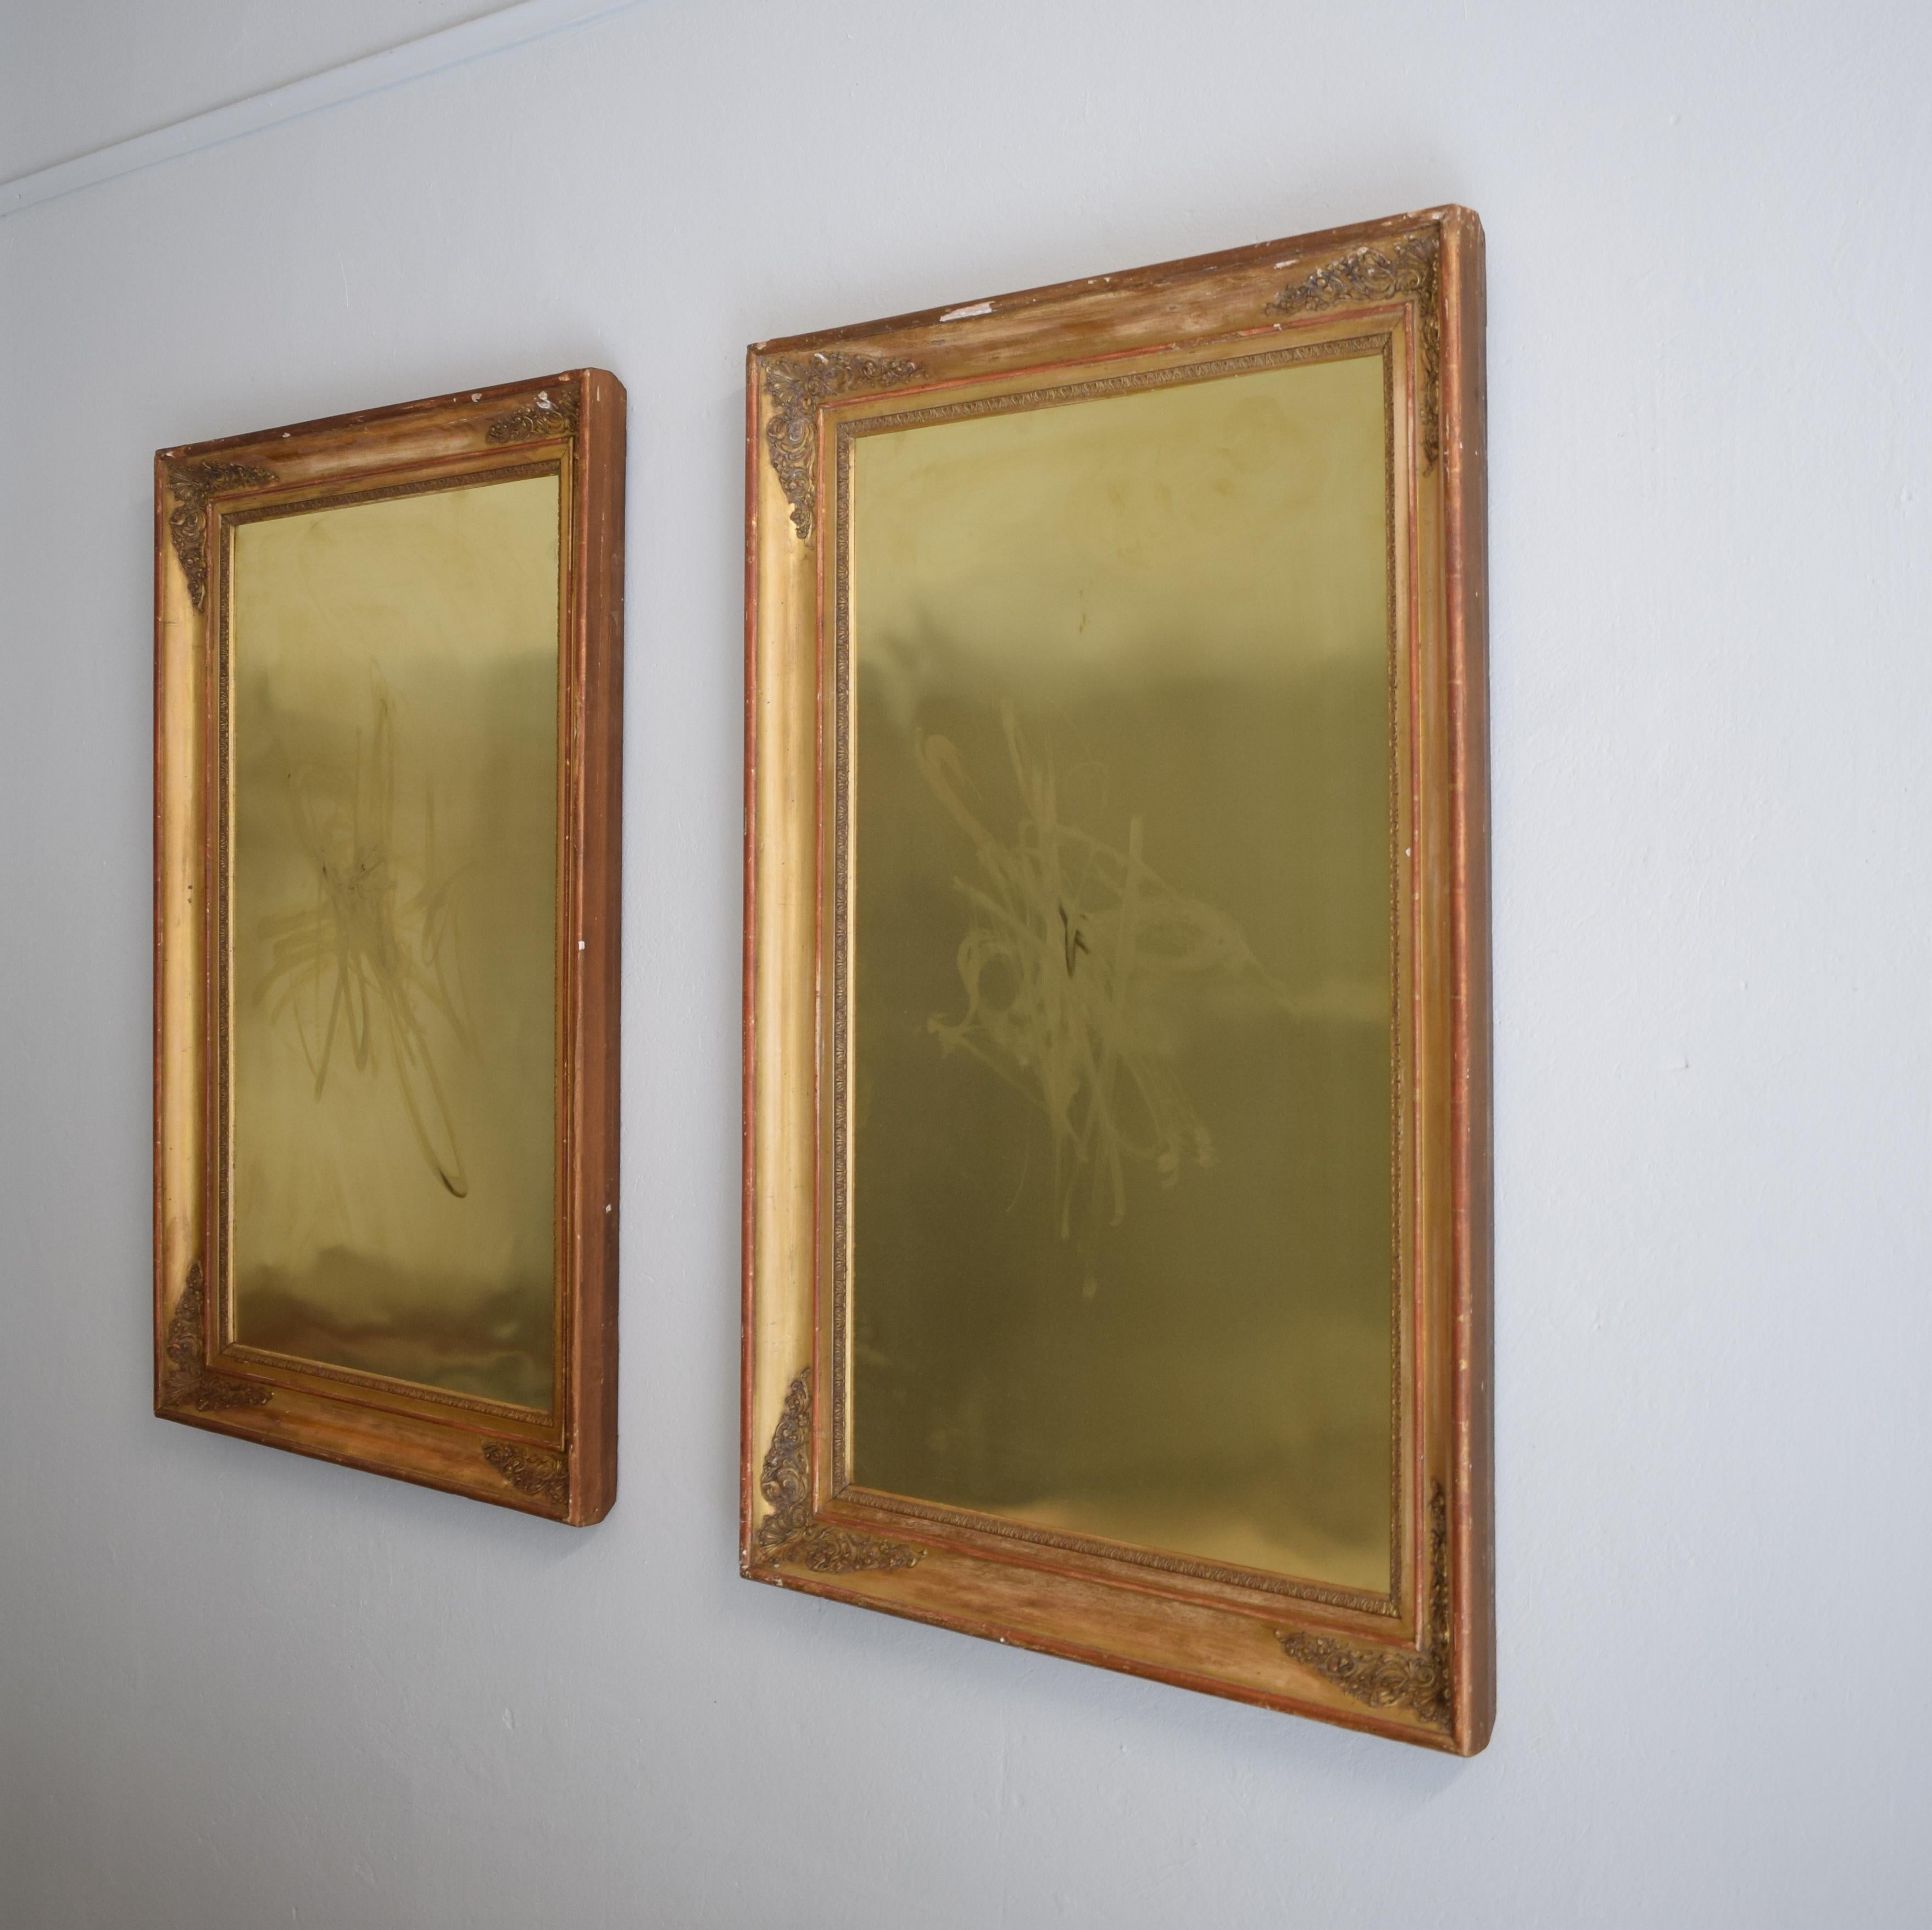  Abstract Modern Paintings on Brass Huge Pair of Late 19th Century Gilded Frames For Sale 5